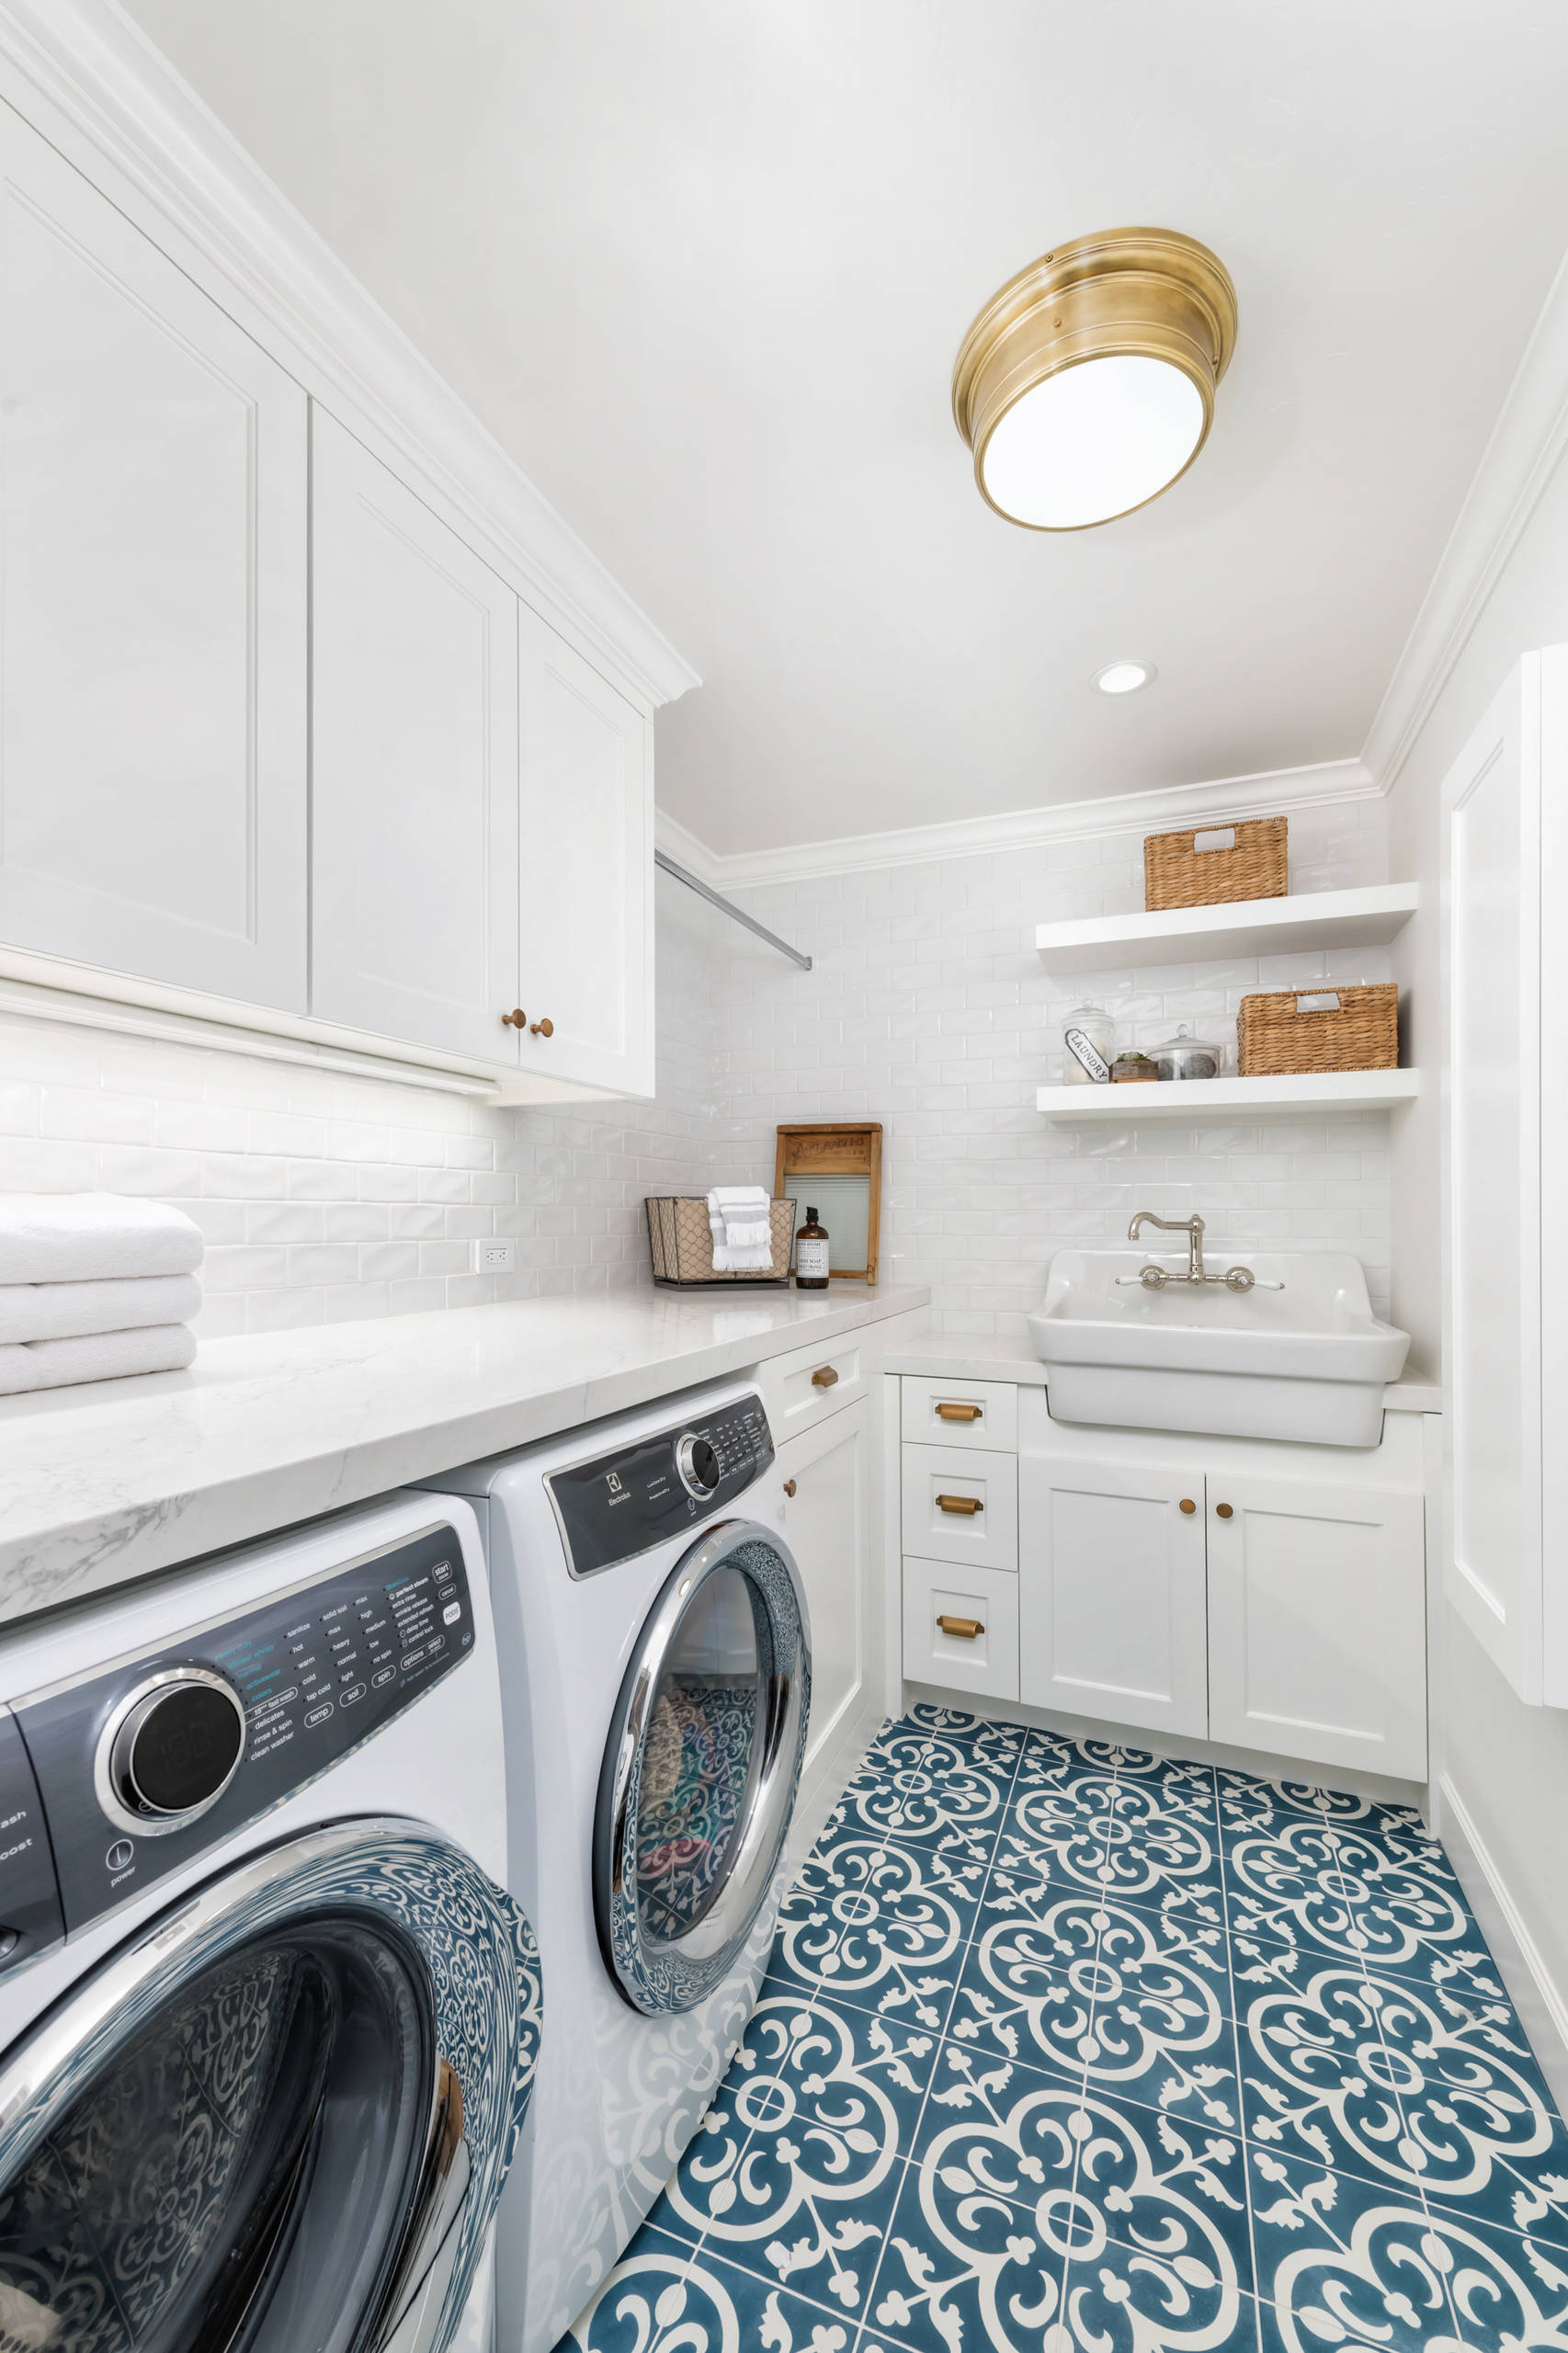 https://st.hzcdn.com/simgs/pictures/laundry-rooms/knoll-farmhouse-laundry-room-in-the-deets-img~fae16ff80c553b41_14-1193-1-169f308.jpg